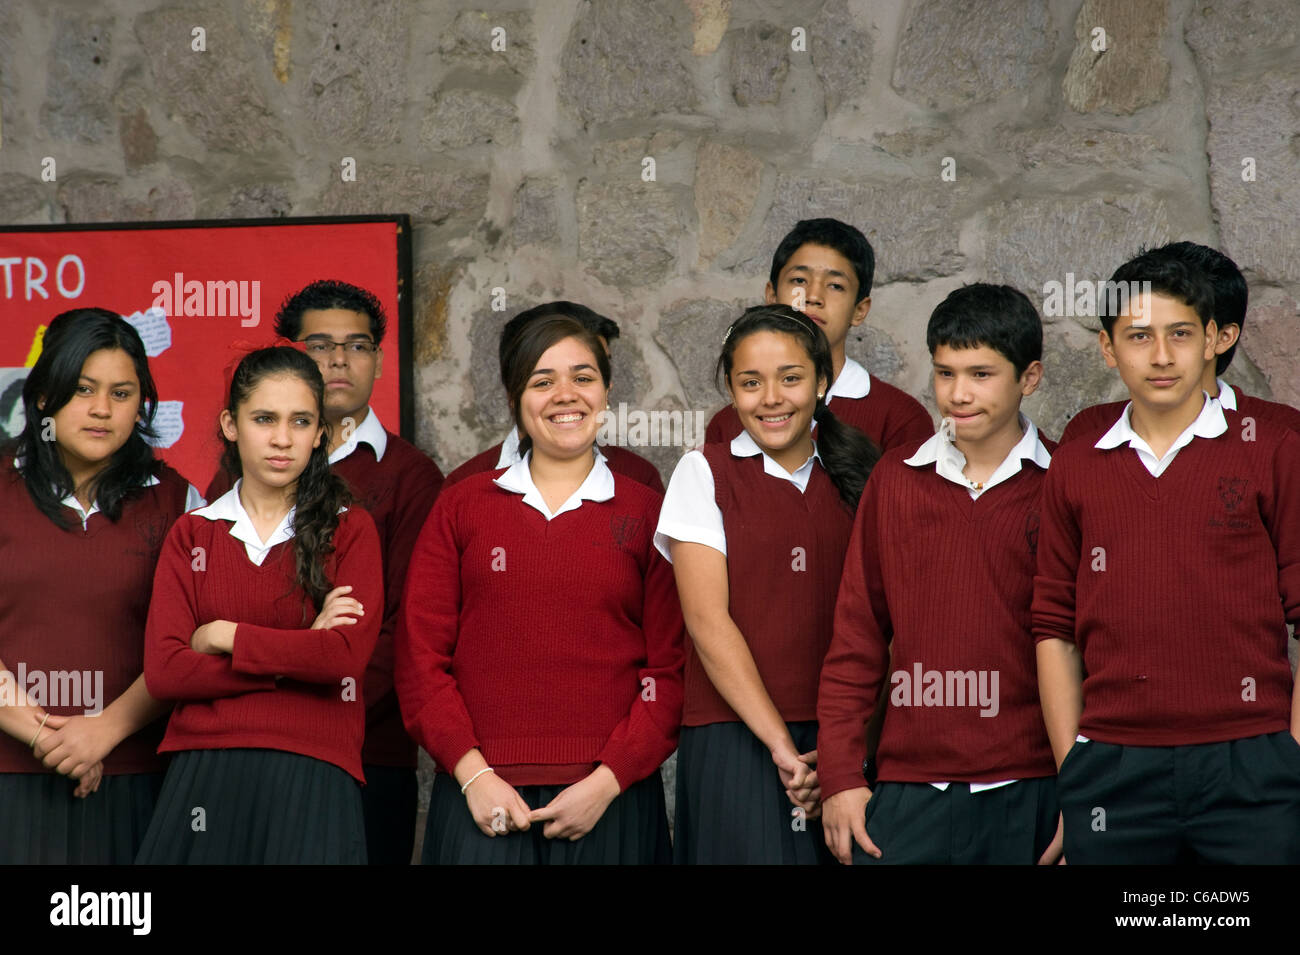 Young students at a school in Morelia, Mexico Stock Photo